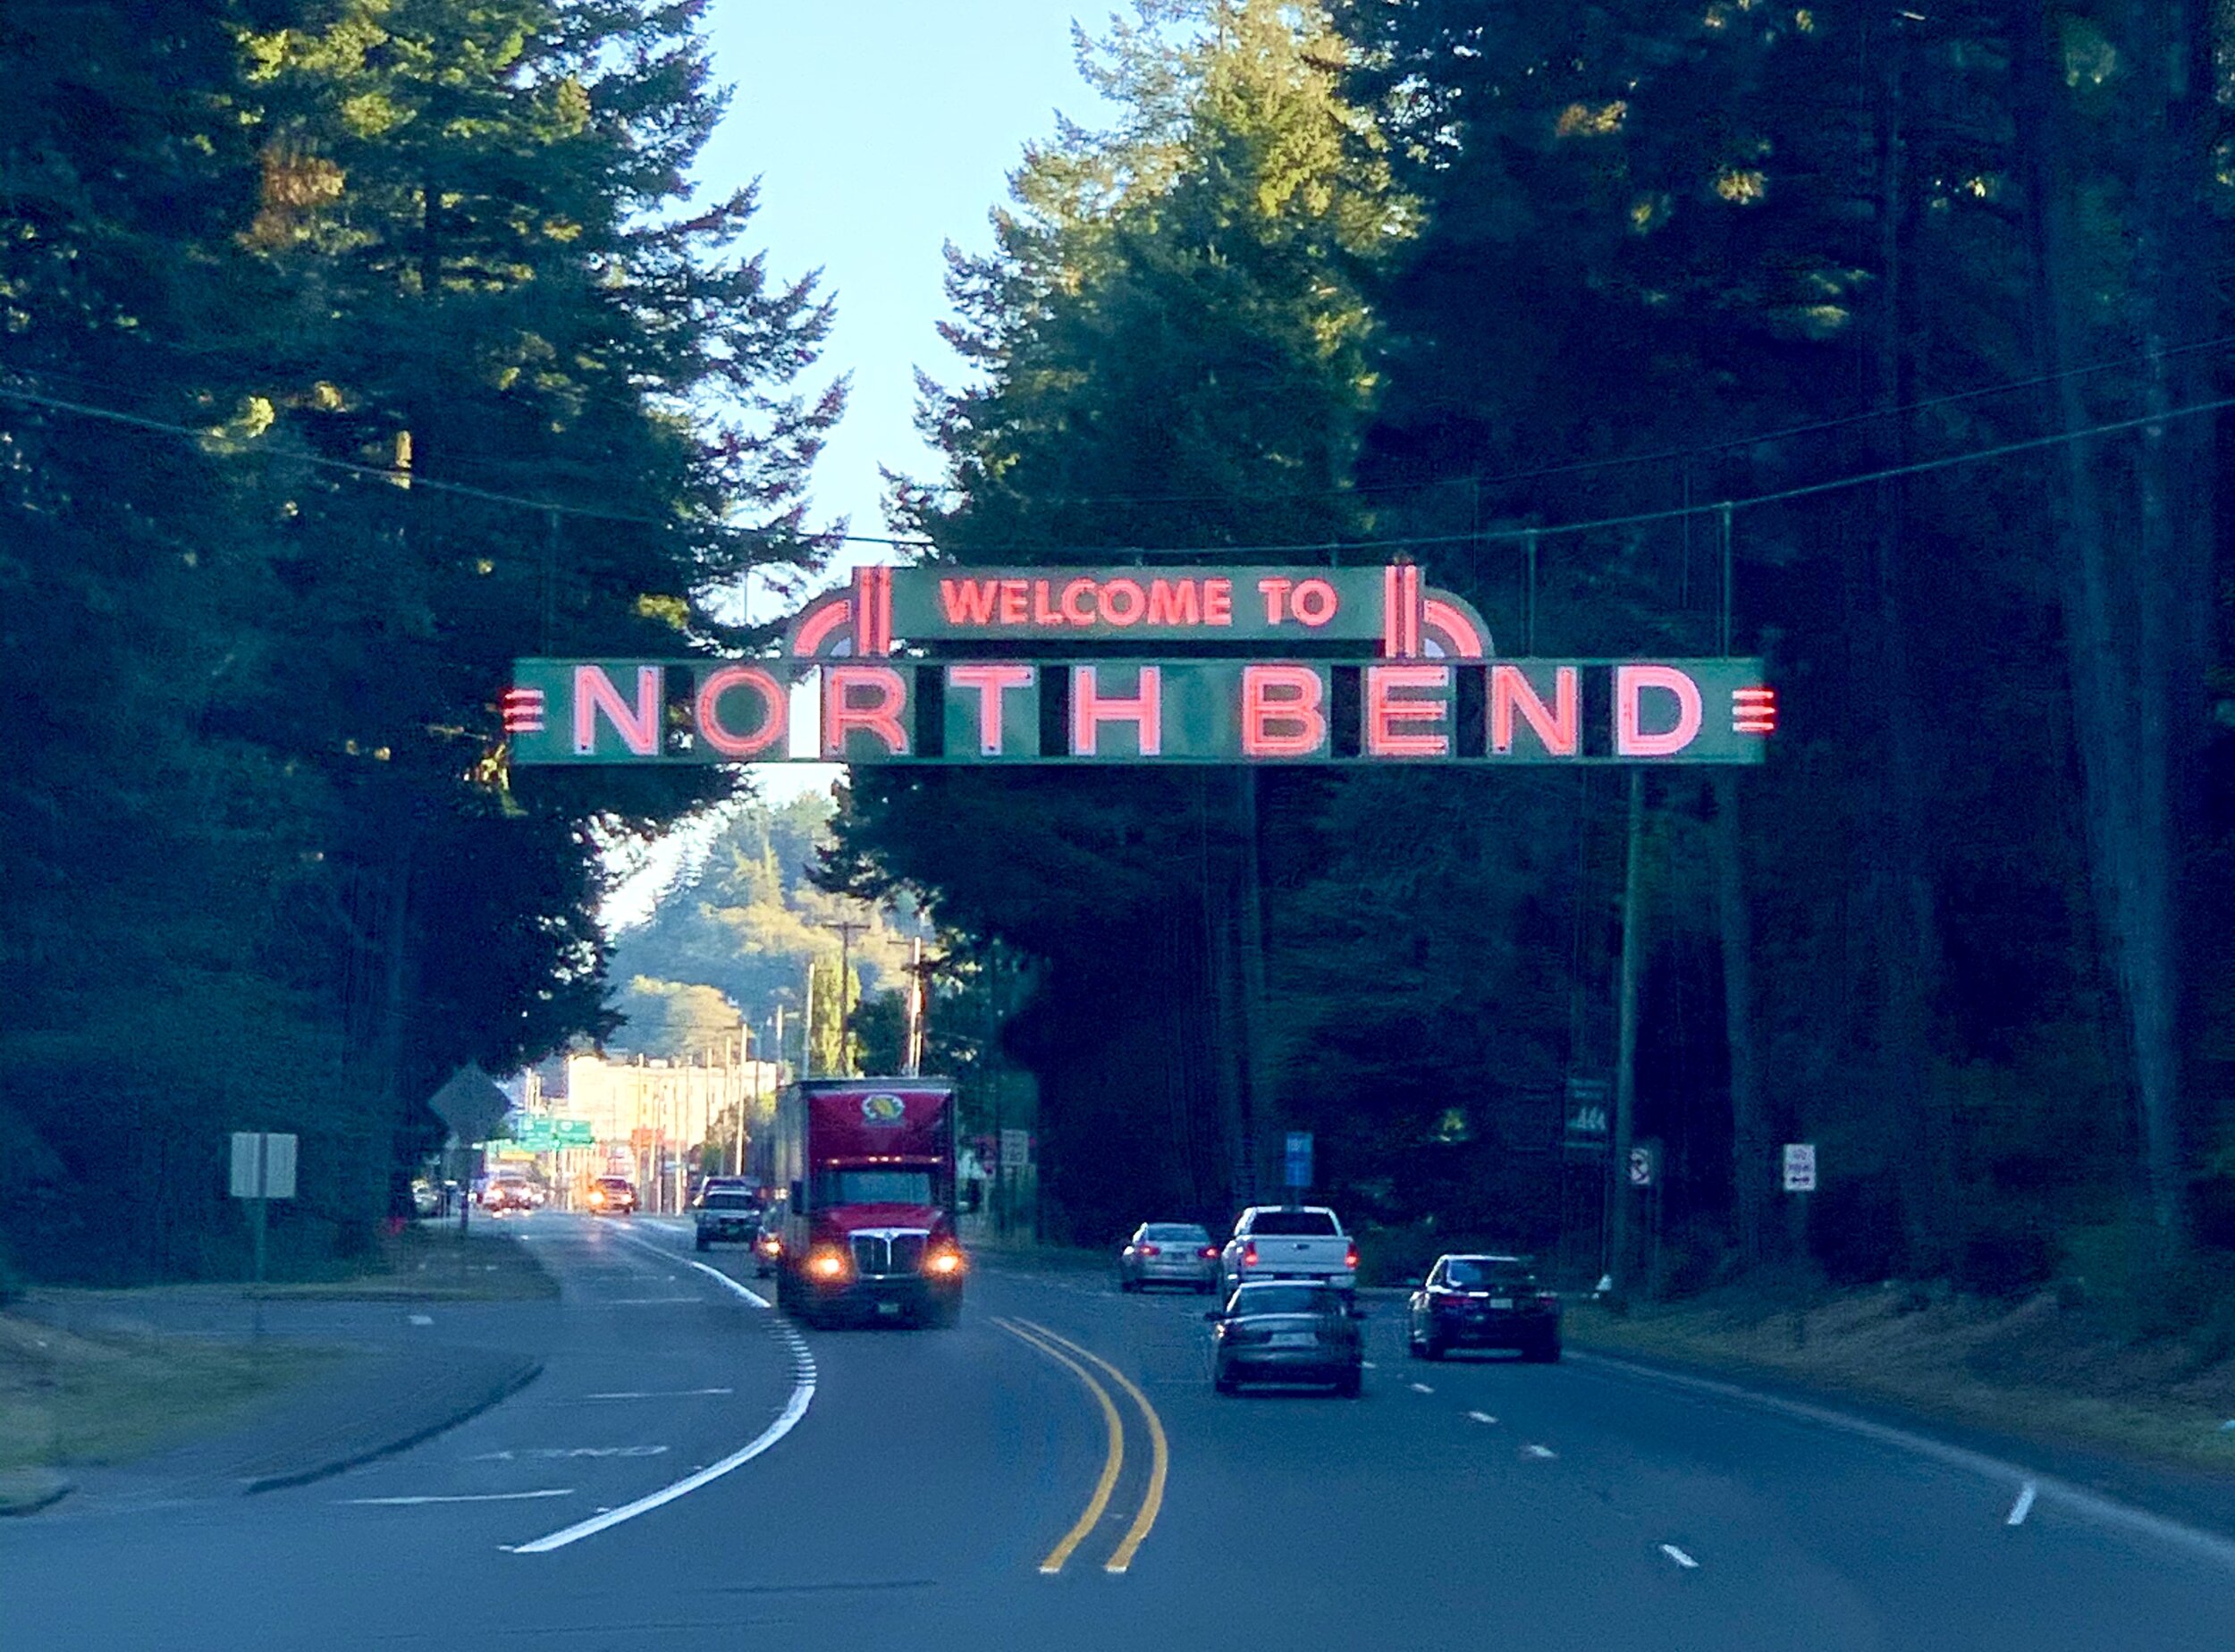  First erected 1936, the iconic welcome sign hanging over Route 101 in  North Bend  was sentimental to its residents, but the cherished sign was in disrepair with only a portion of the lights working. As a rule, Oregon no longer allows neon welcome s